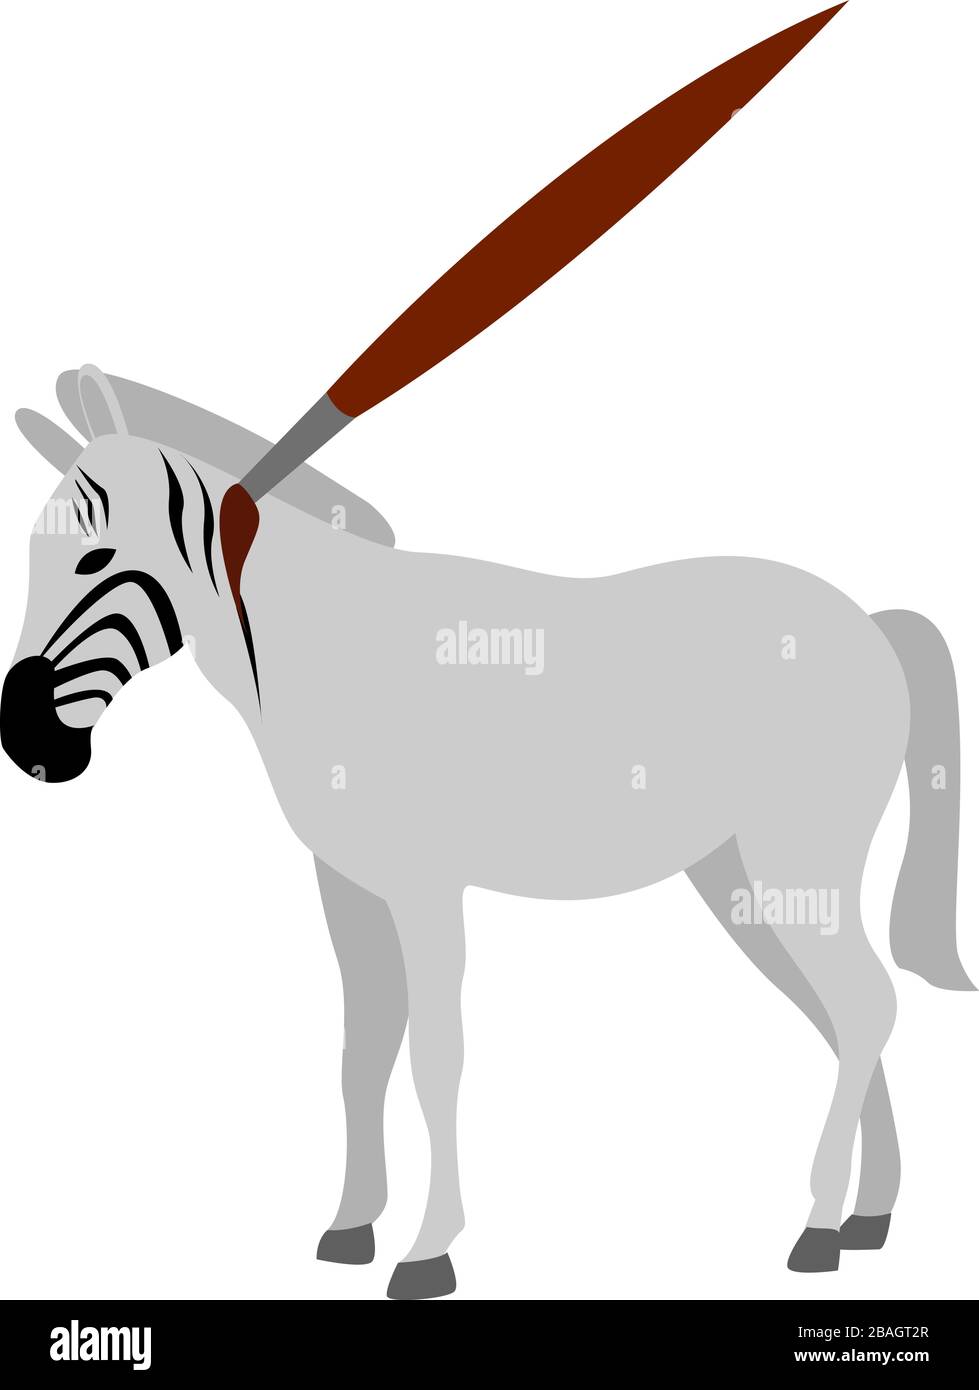 Drawing a Zebra, illustration, vector on white background Stock Vector